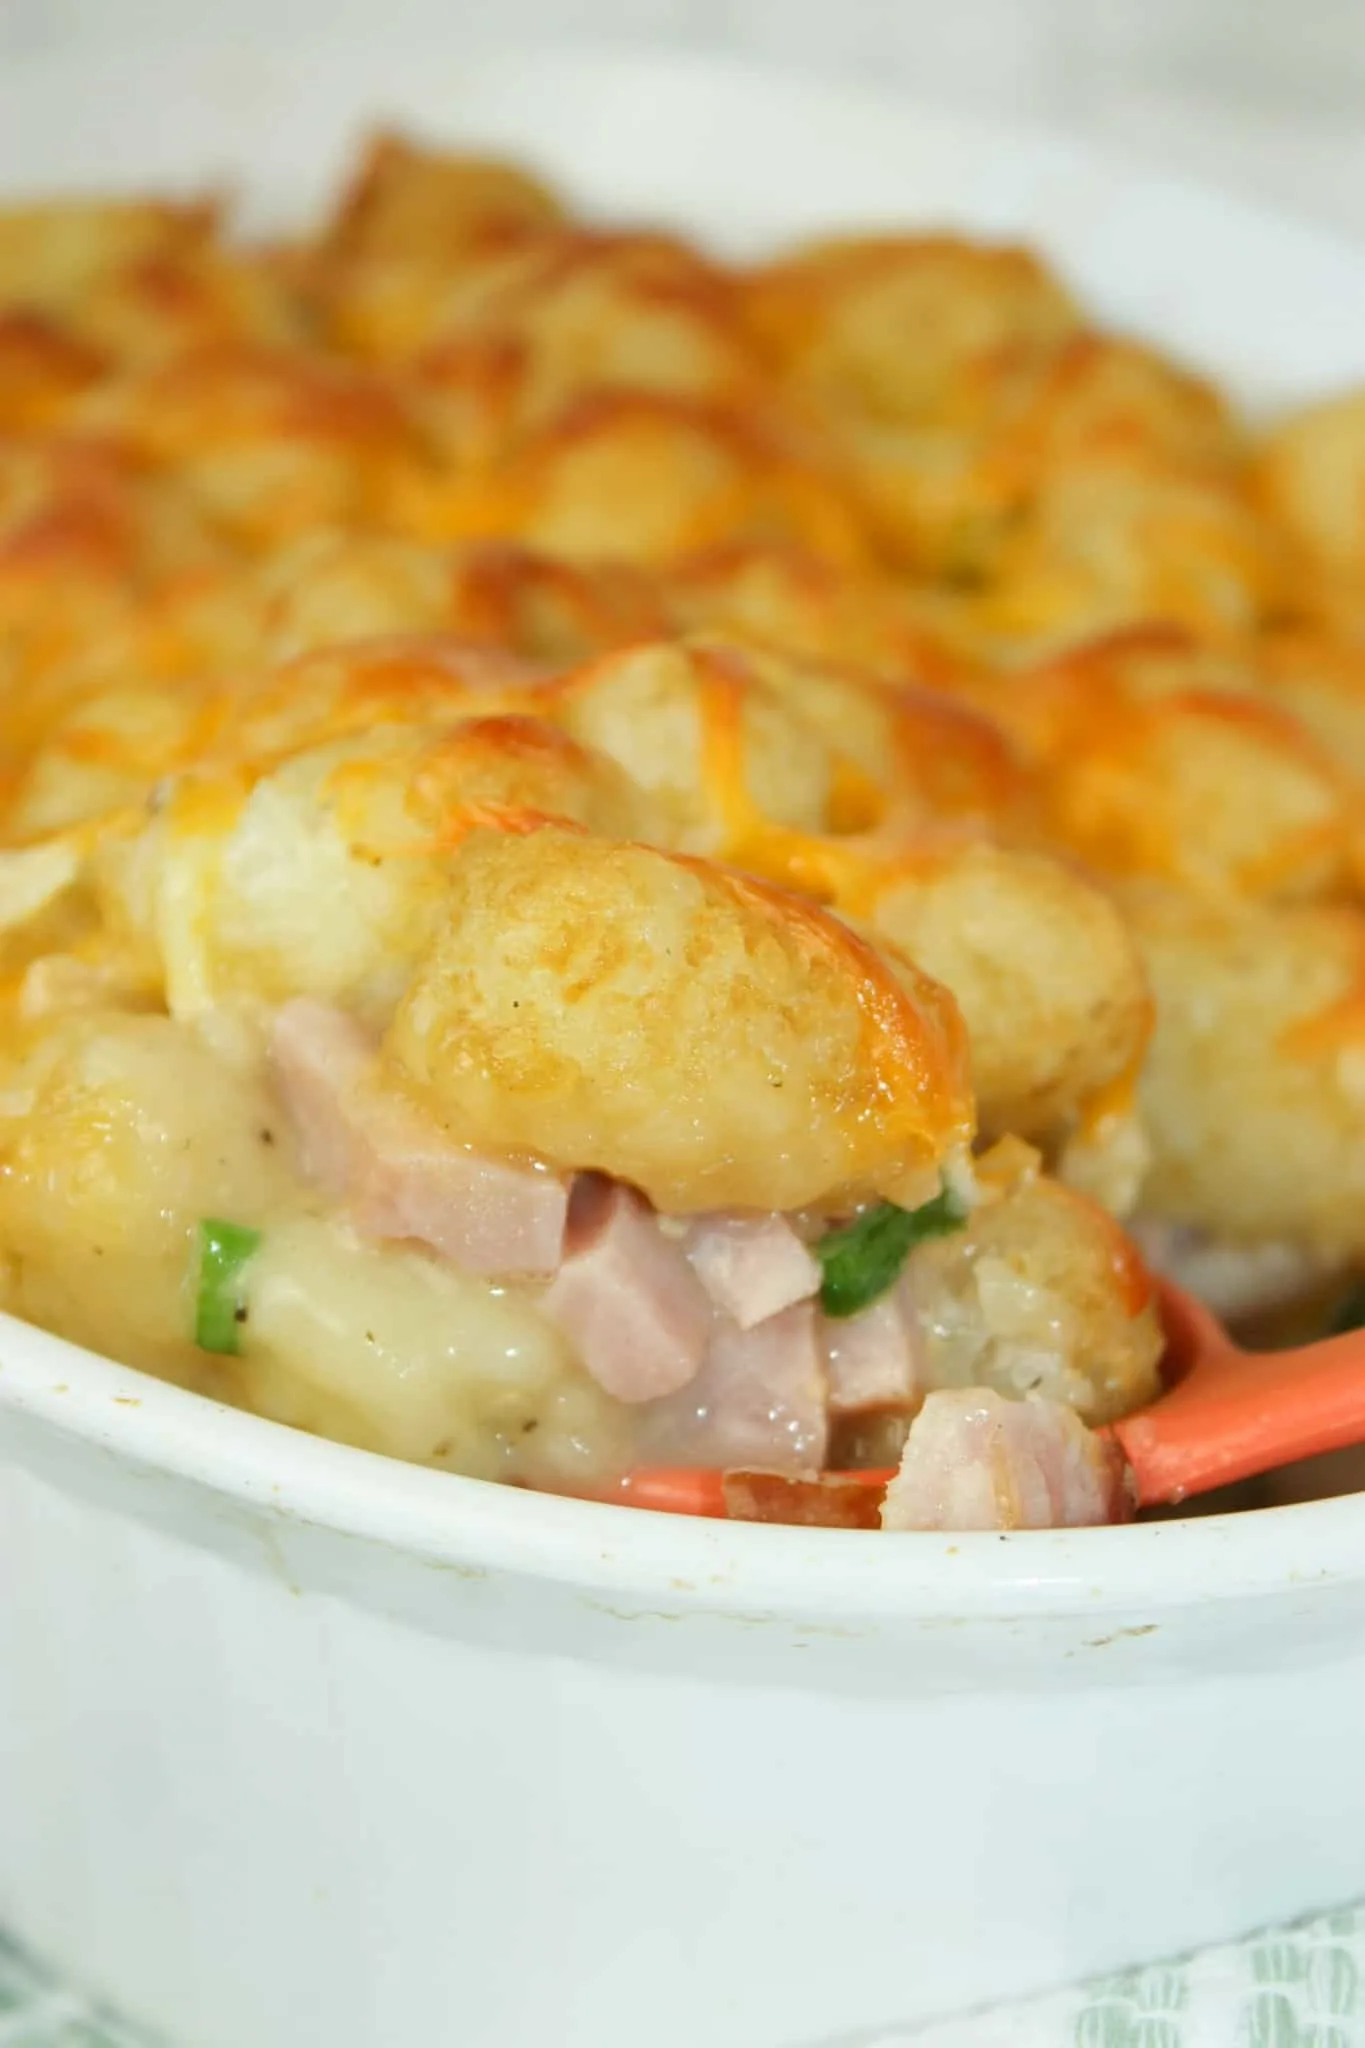 Tater Tot Casserole with Ham is an easy dinner recipe that is loaded with crunchy tater tots and cooked ham.  The gluten free condensed cream of chicken soup not only adds moisture but flavour as well.